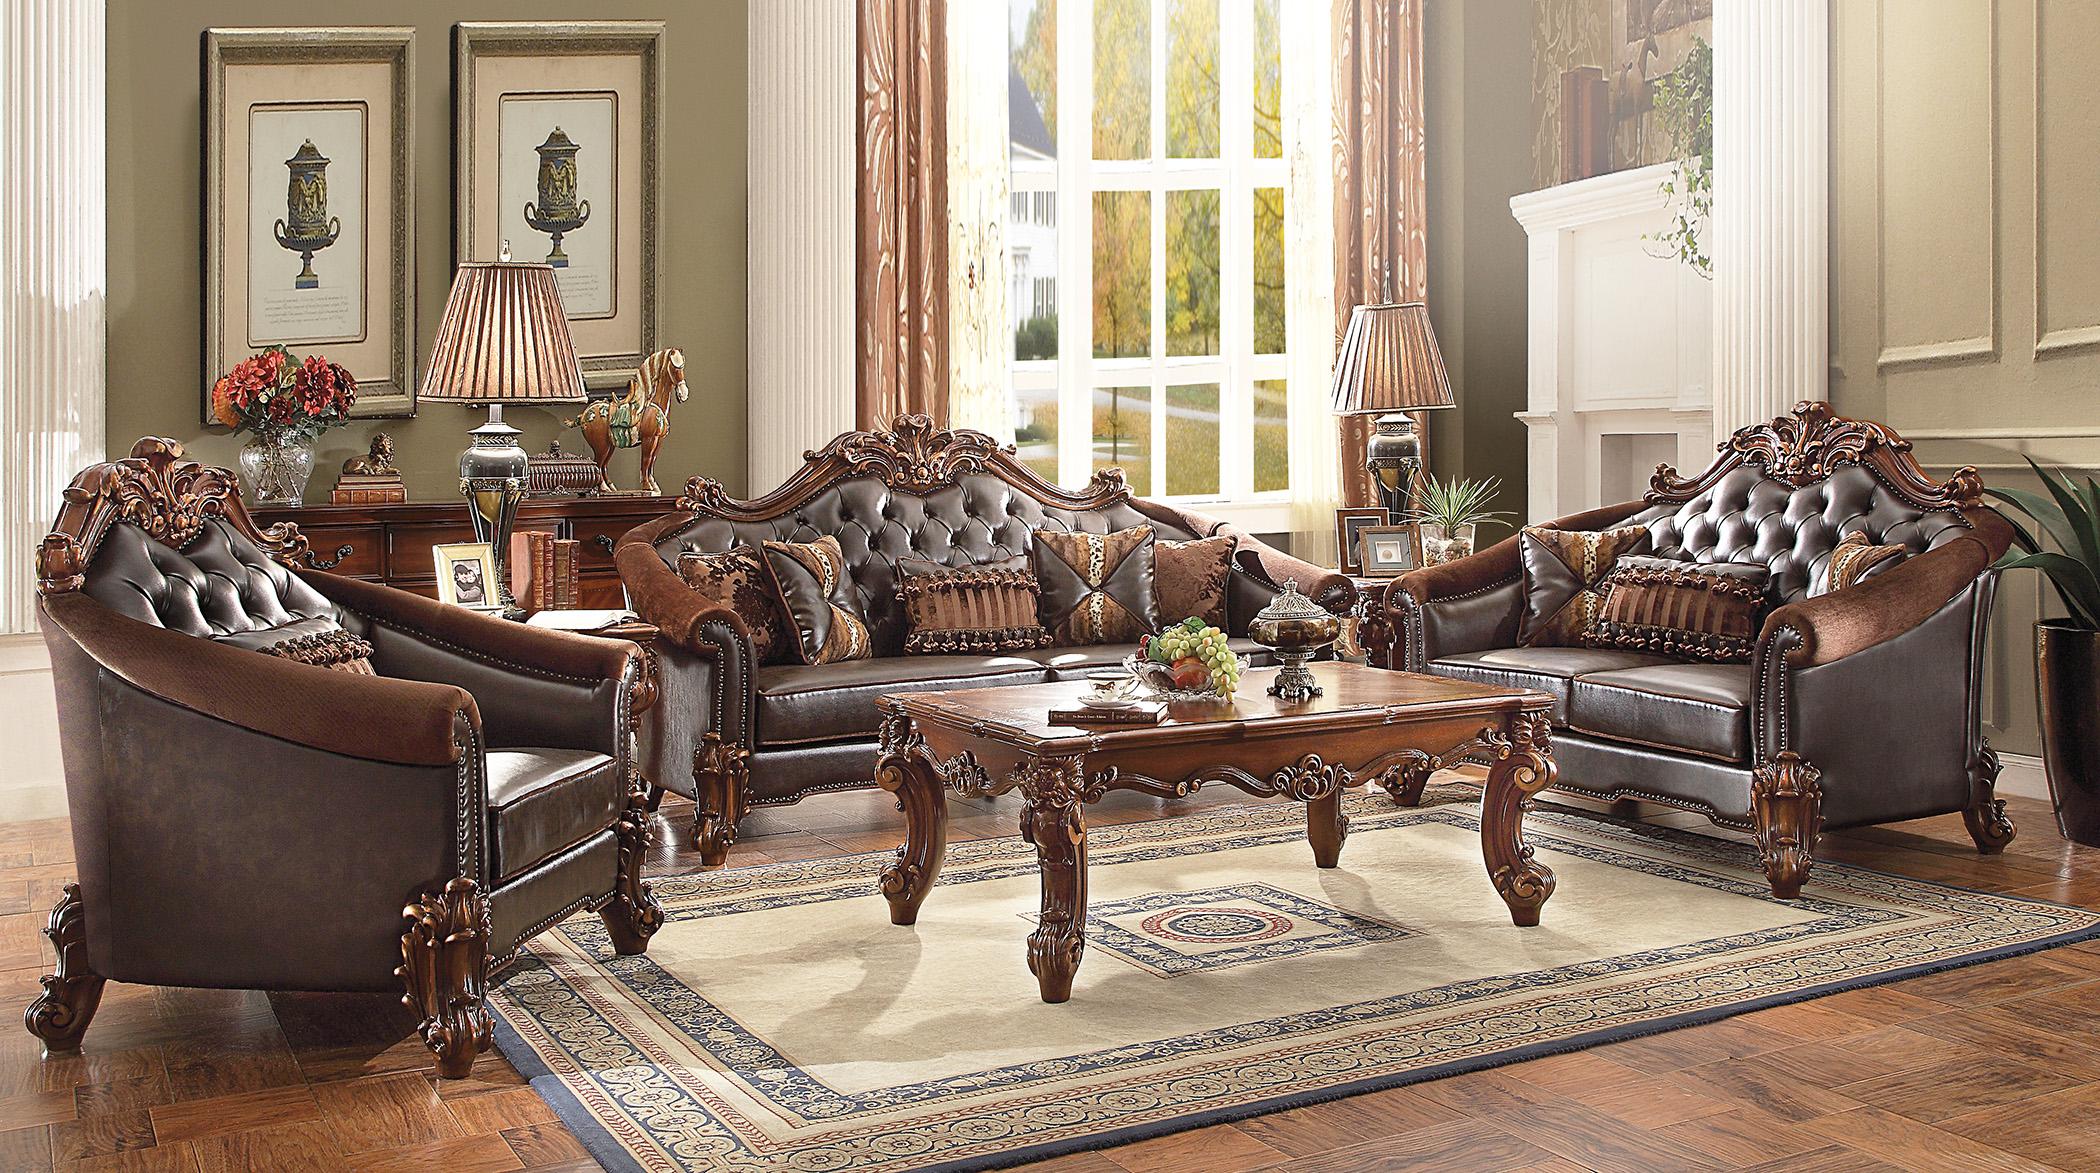 Traditional,  Vintage Sofa Loveseat Chair and Coffee Table Vendome II-53130 Vendome II-53130-Set-4 in Cherry, Brown Faux Leather